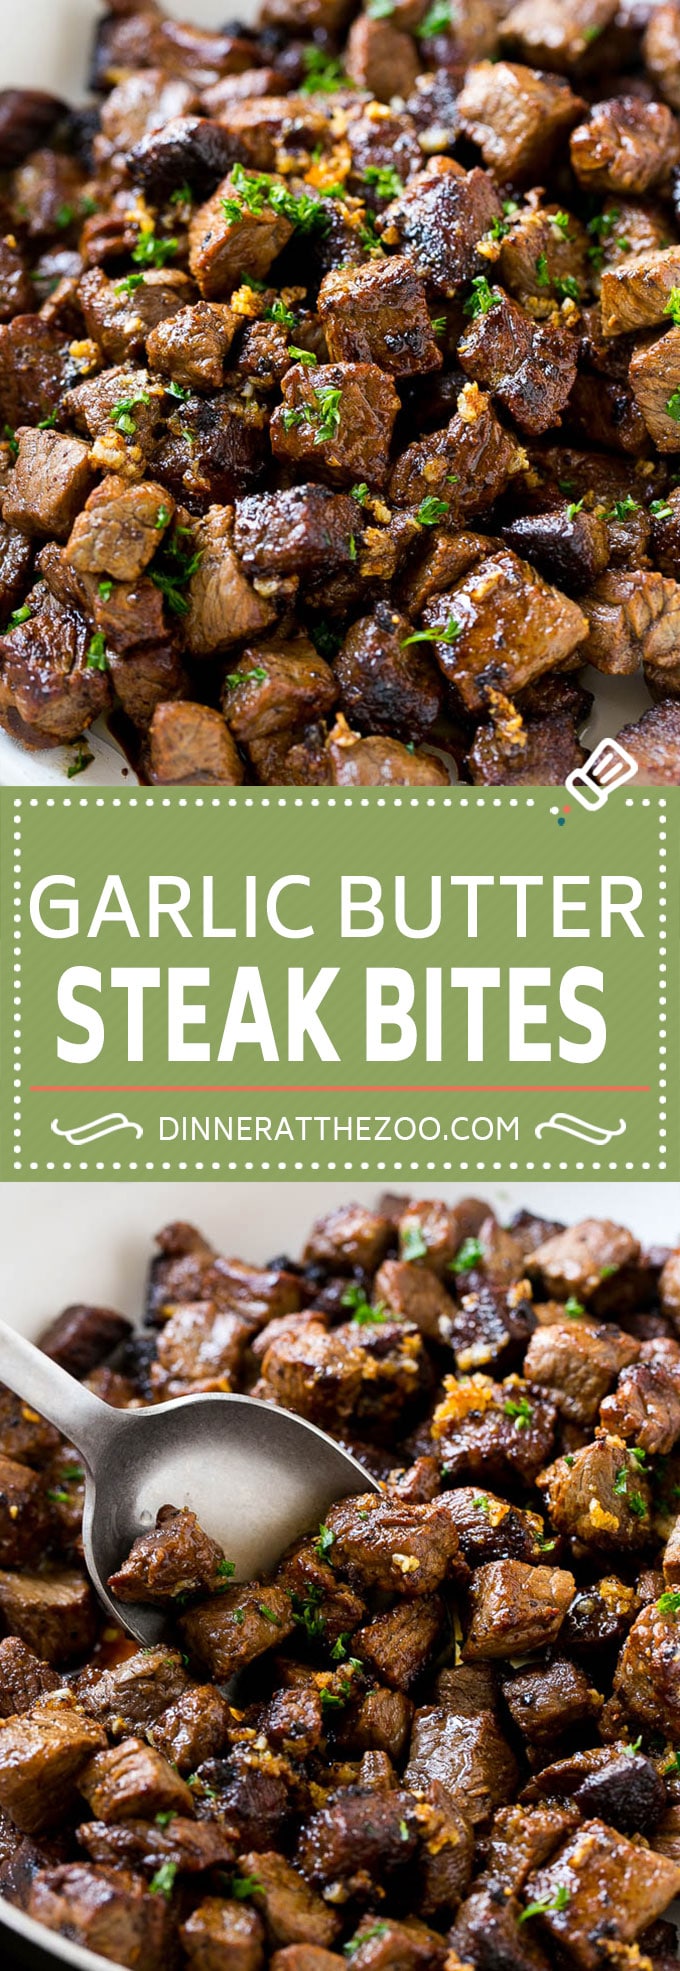 Steak Bites With Garlic Butter Dinner At The Zoo